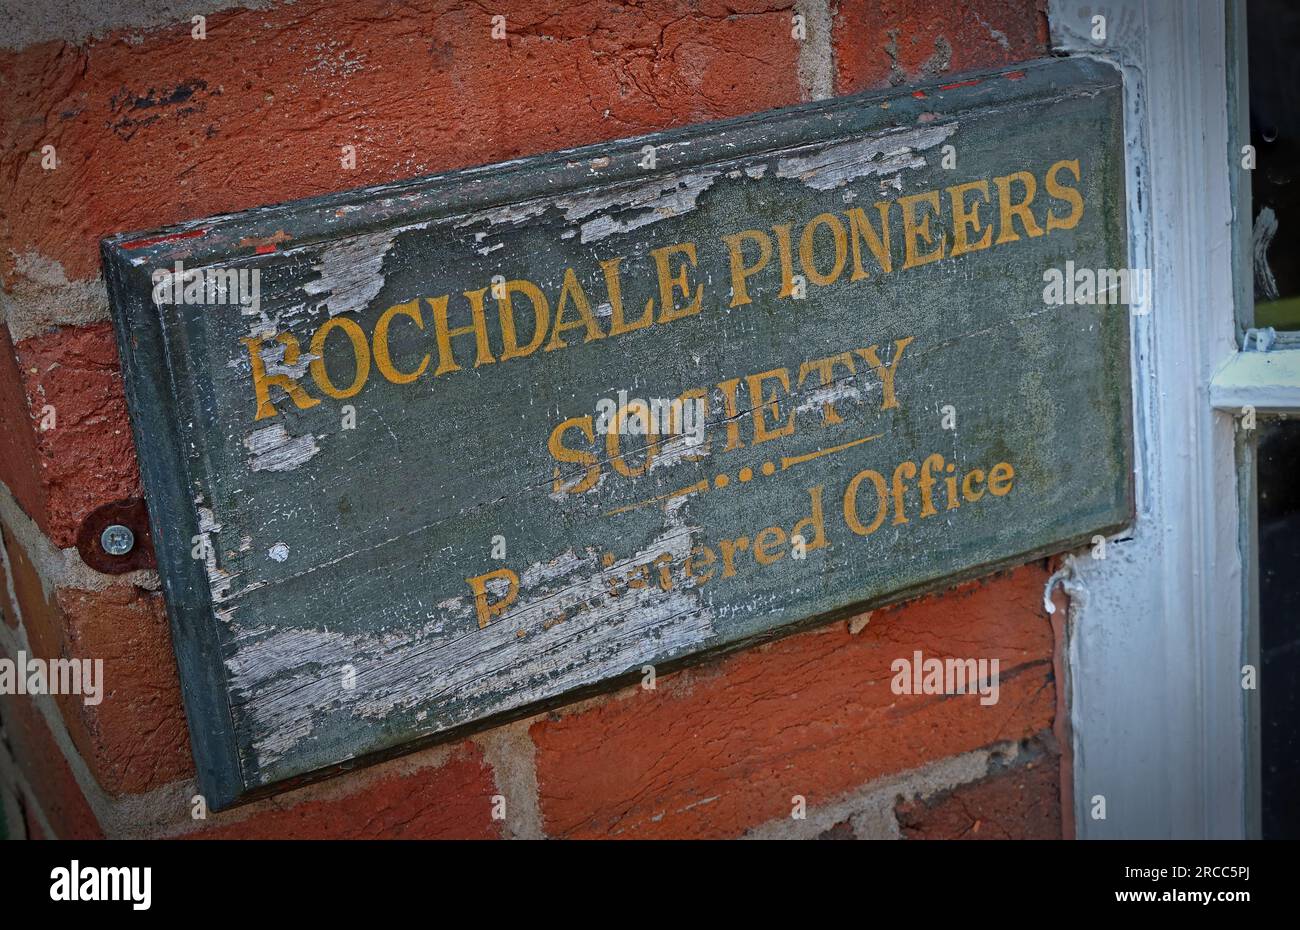 Faded and worn Rochdale Pioneers Society sign, Registered Office, Toad Lane, Town Centre, Lancashire, England, UK, OL12 0NU Stock Photo